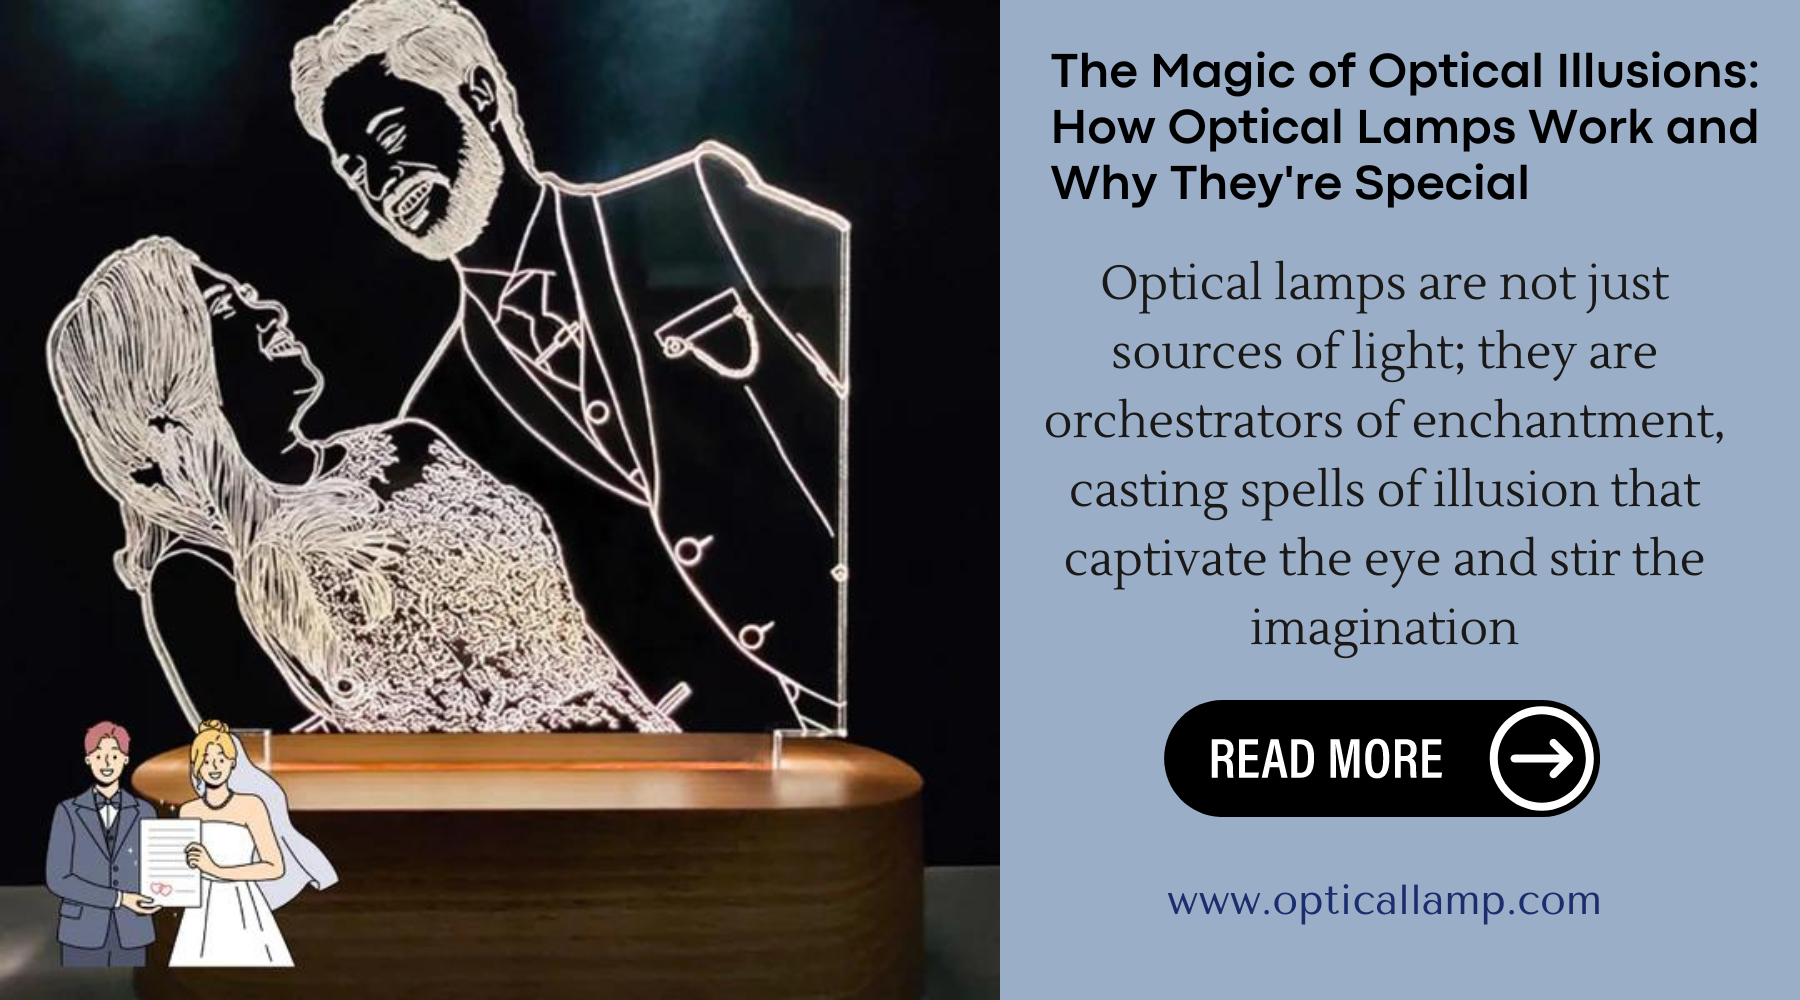 The Magic of Optical Illusions: How Optical Lamps Work and Why They're Special